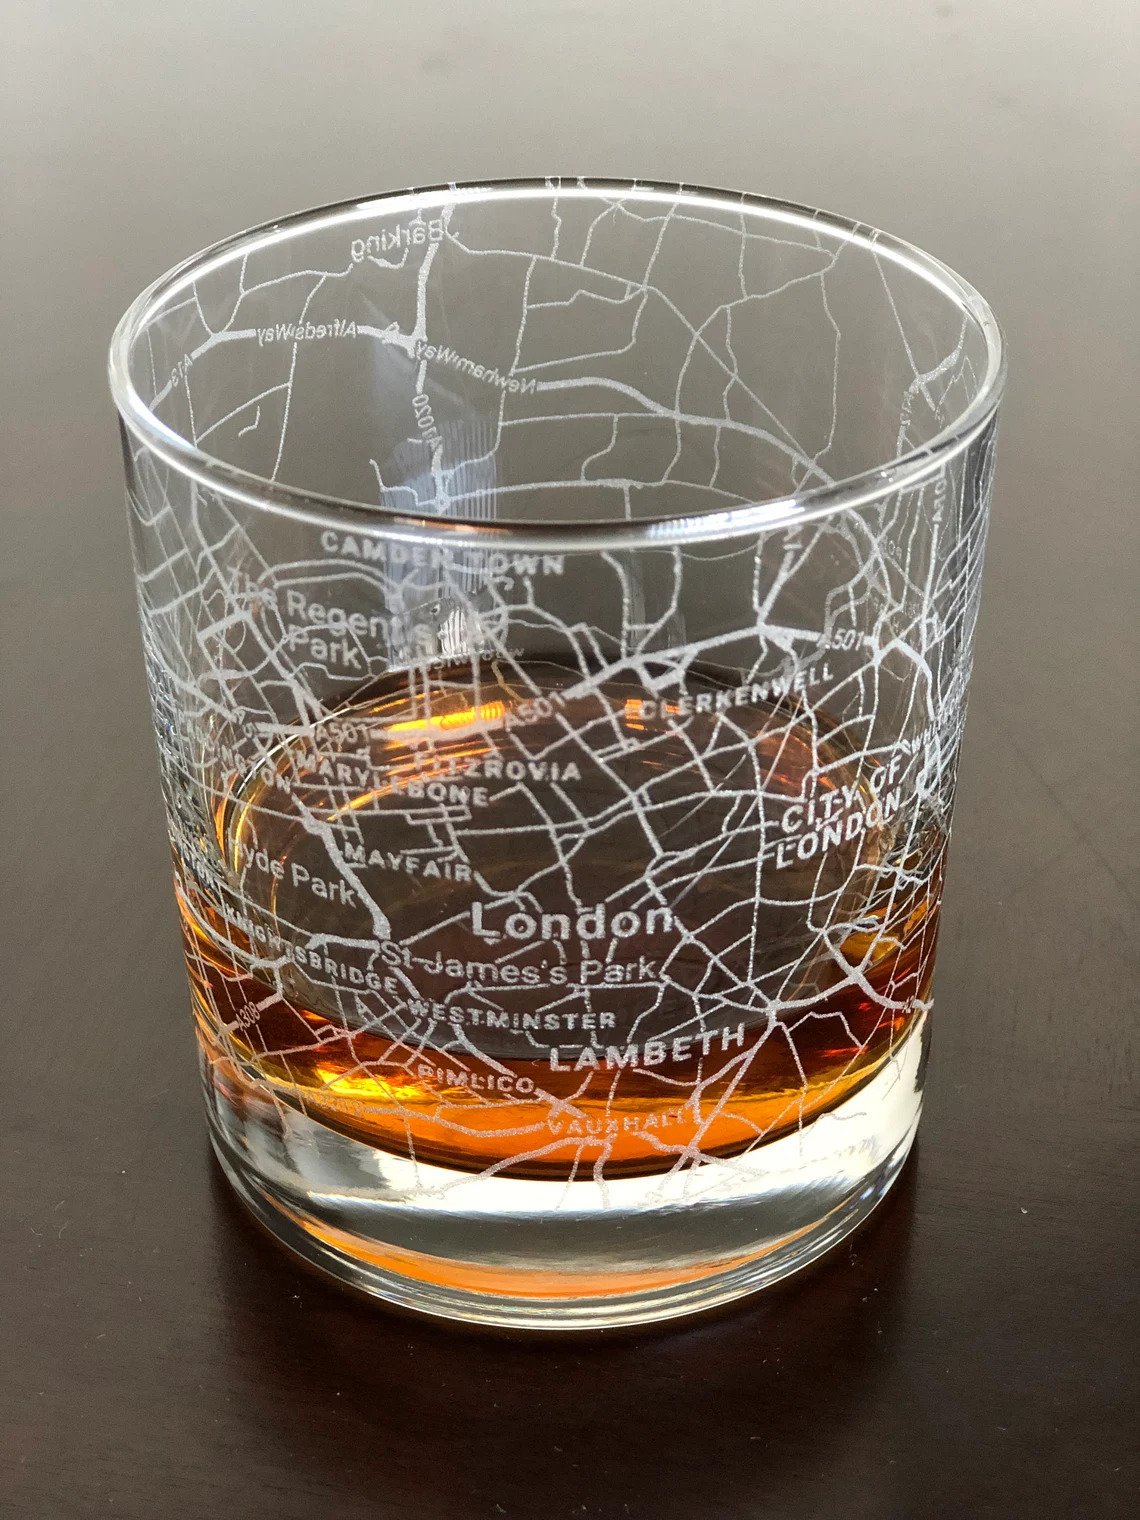 Map of London imprinted on a whiskey glass is one oof the quirkiest gift ideas for London lovers